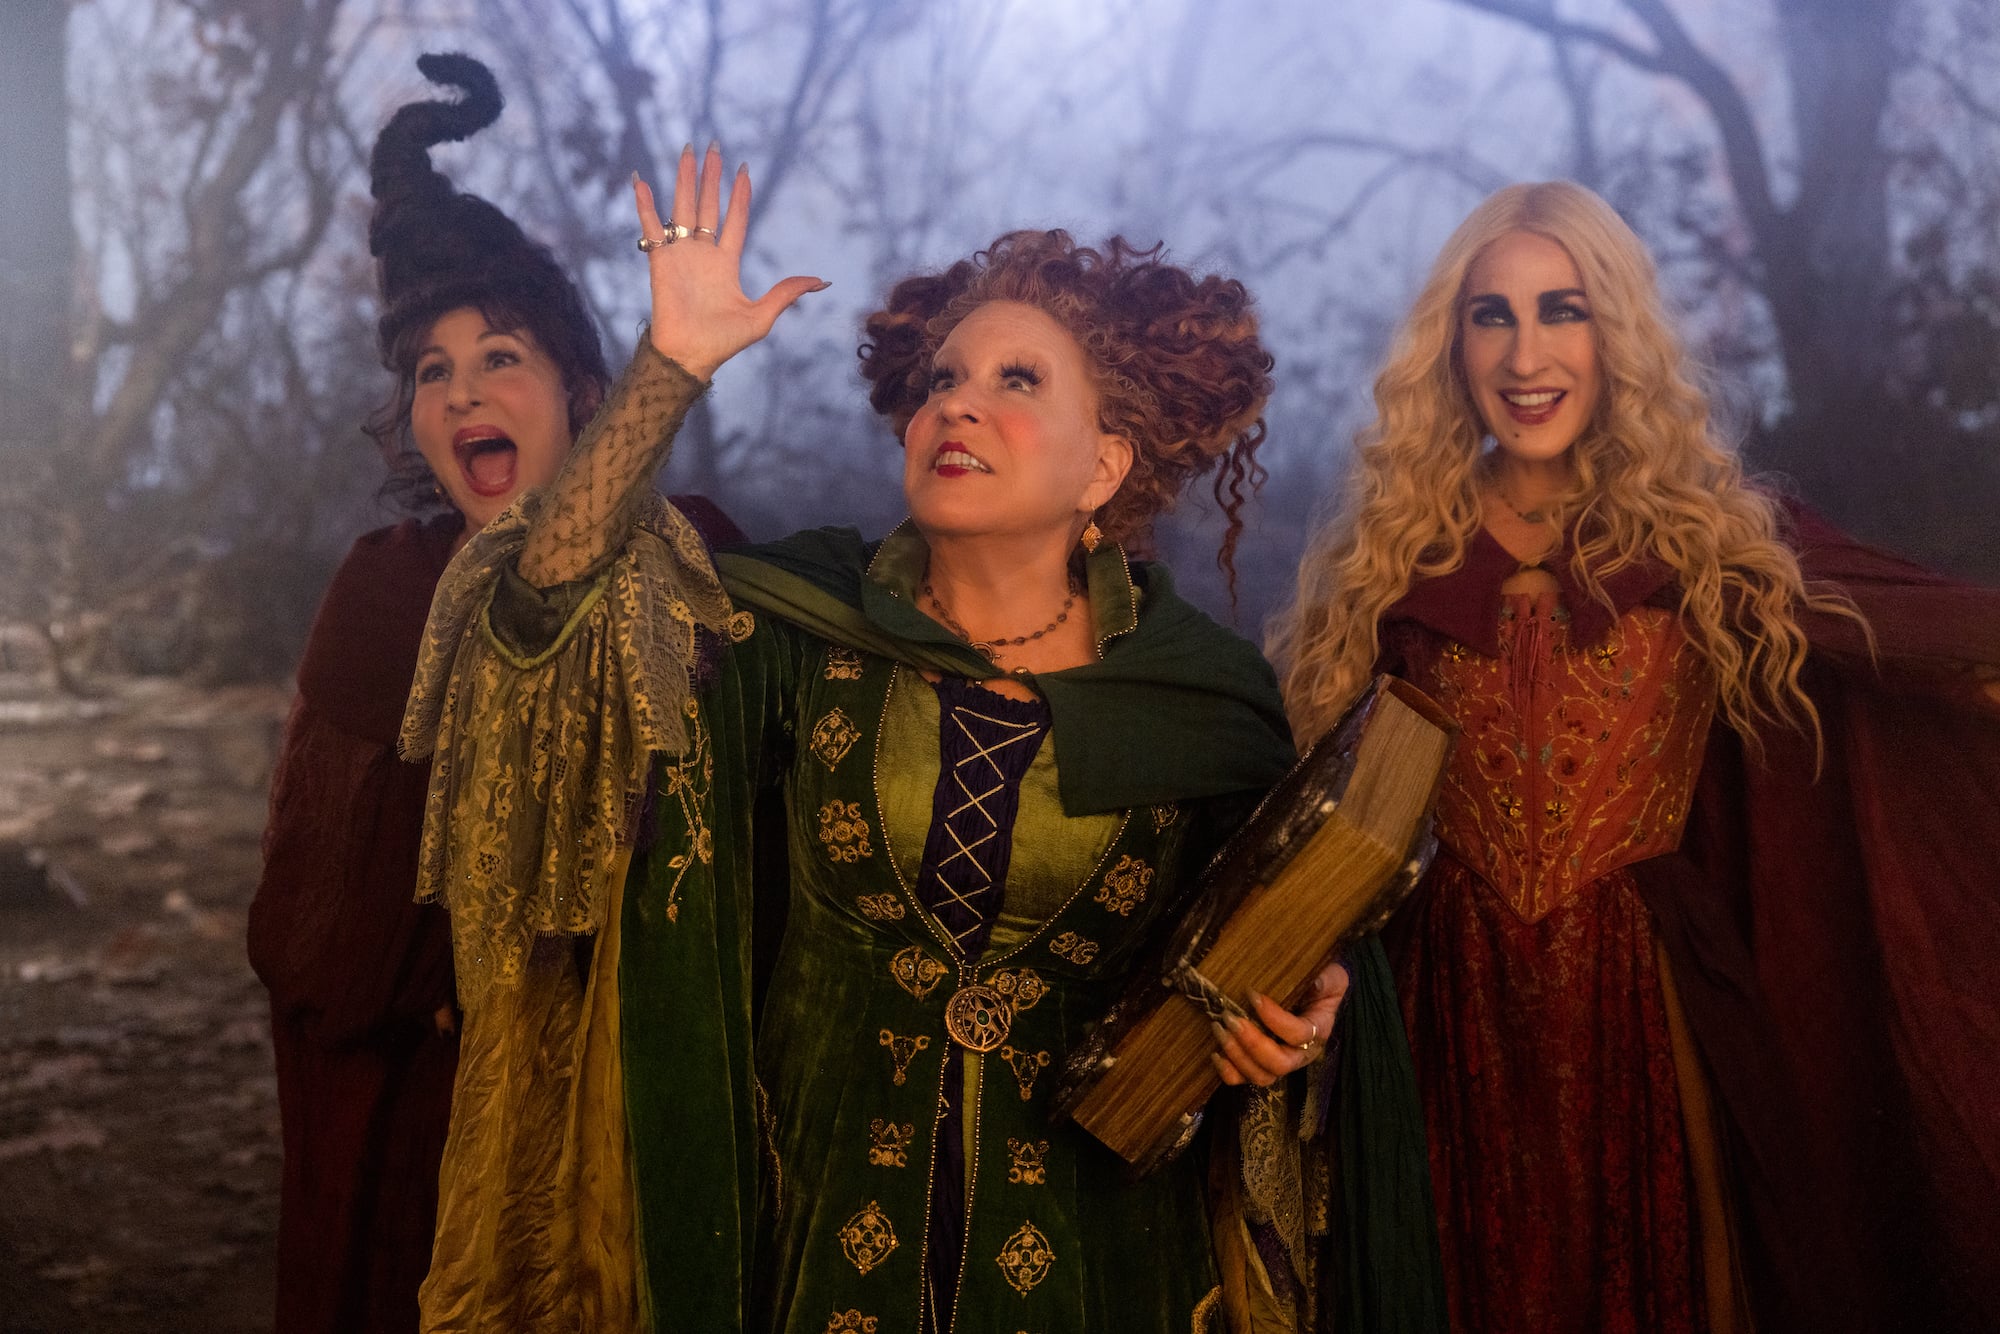 “Hocus Pocus 2” Reveals How the Sanderson Sisters First Became Witches